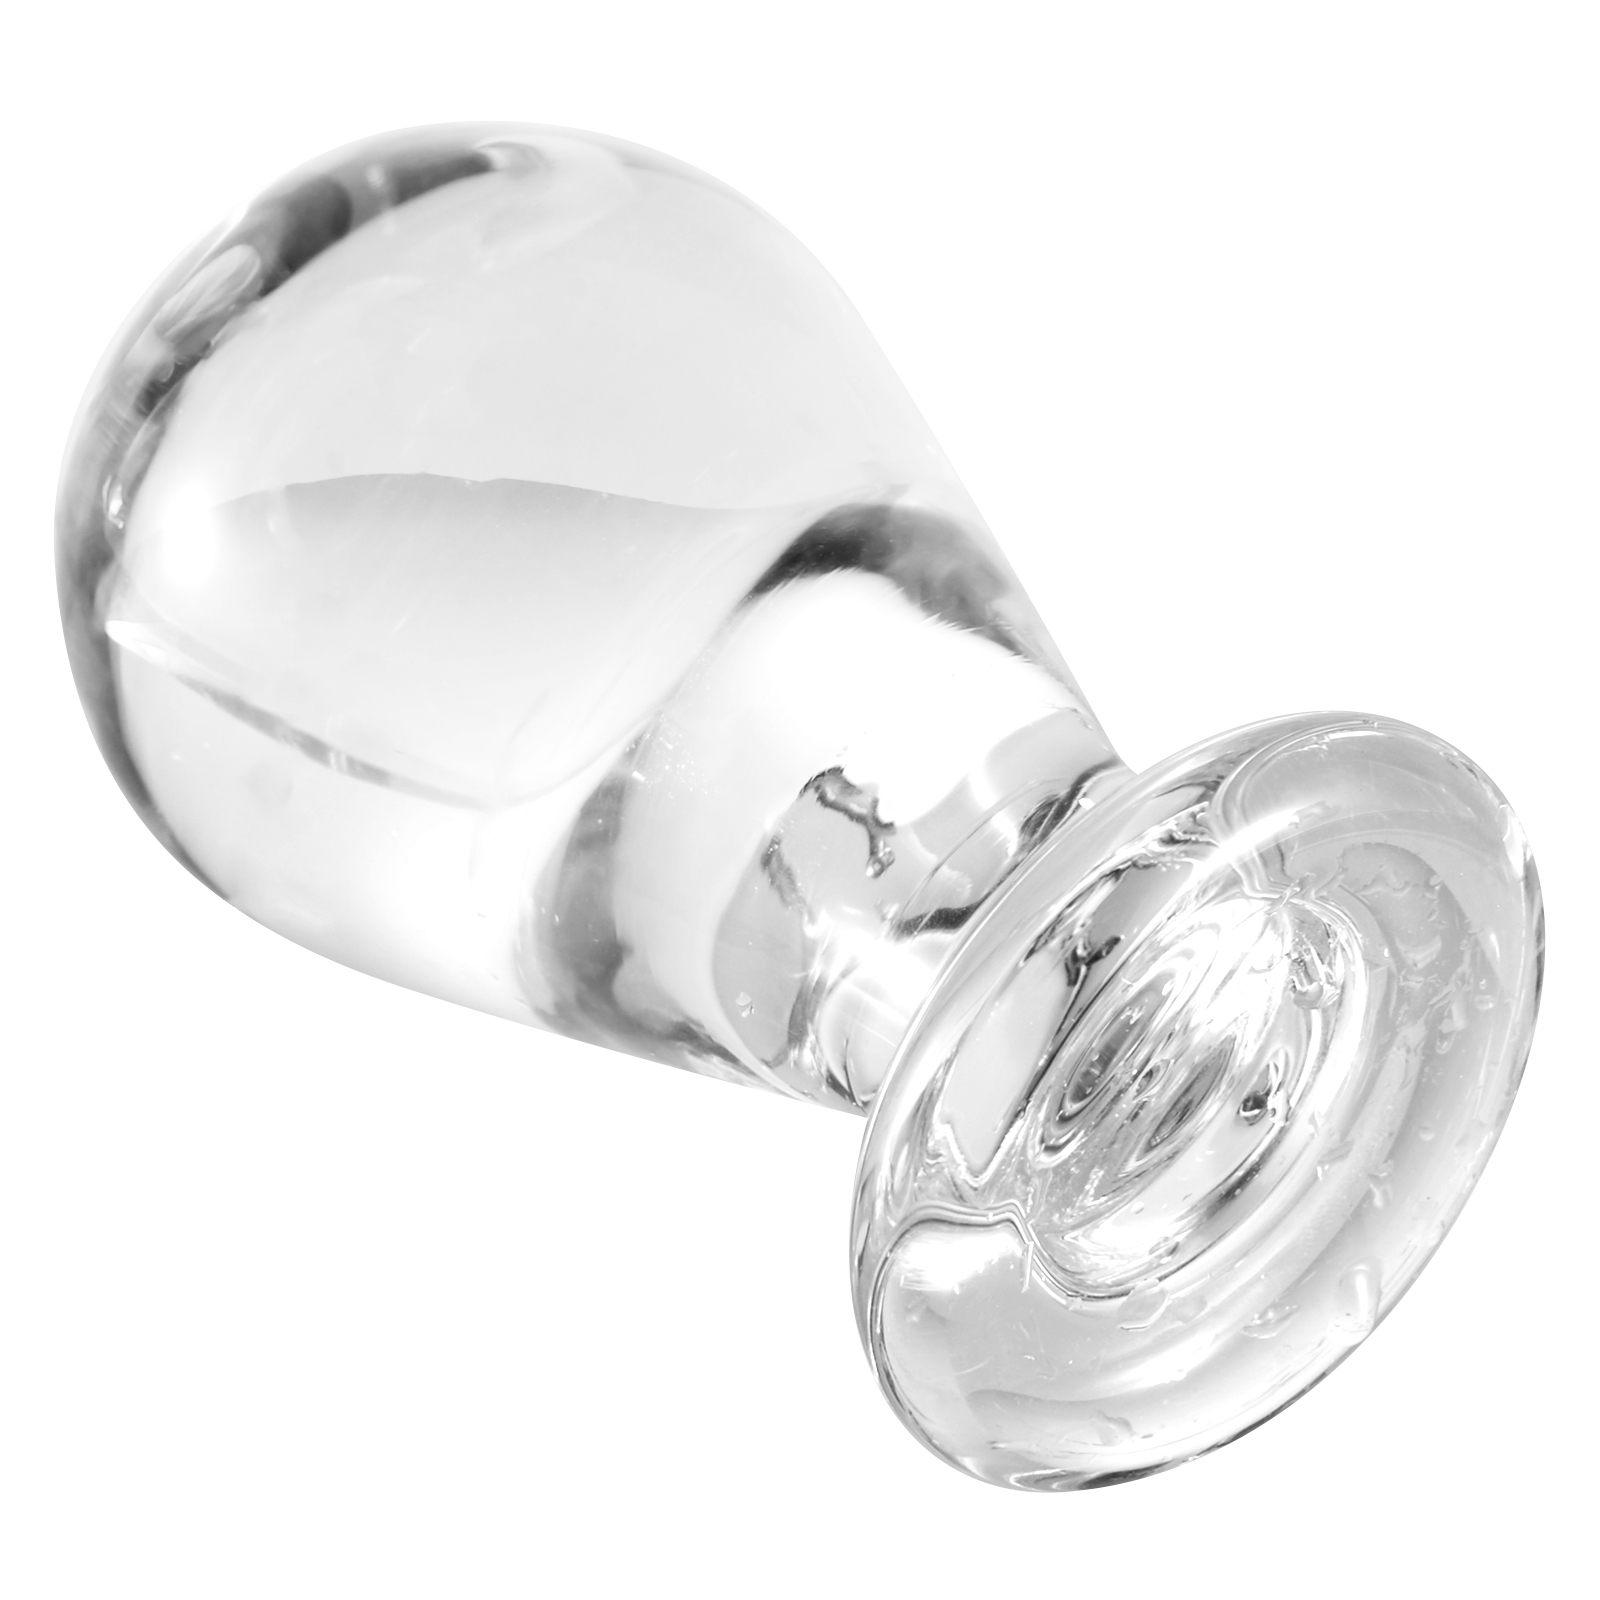 3in1/set Glass Light Bulb T Shape Huge Anal Plug Set Butt Plugs Trainer Anus Intercourse Sexy Toy For Men Women Gay And Couple